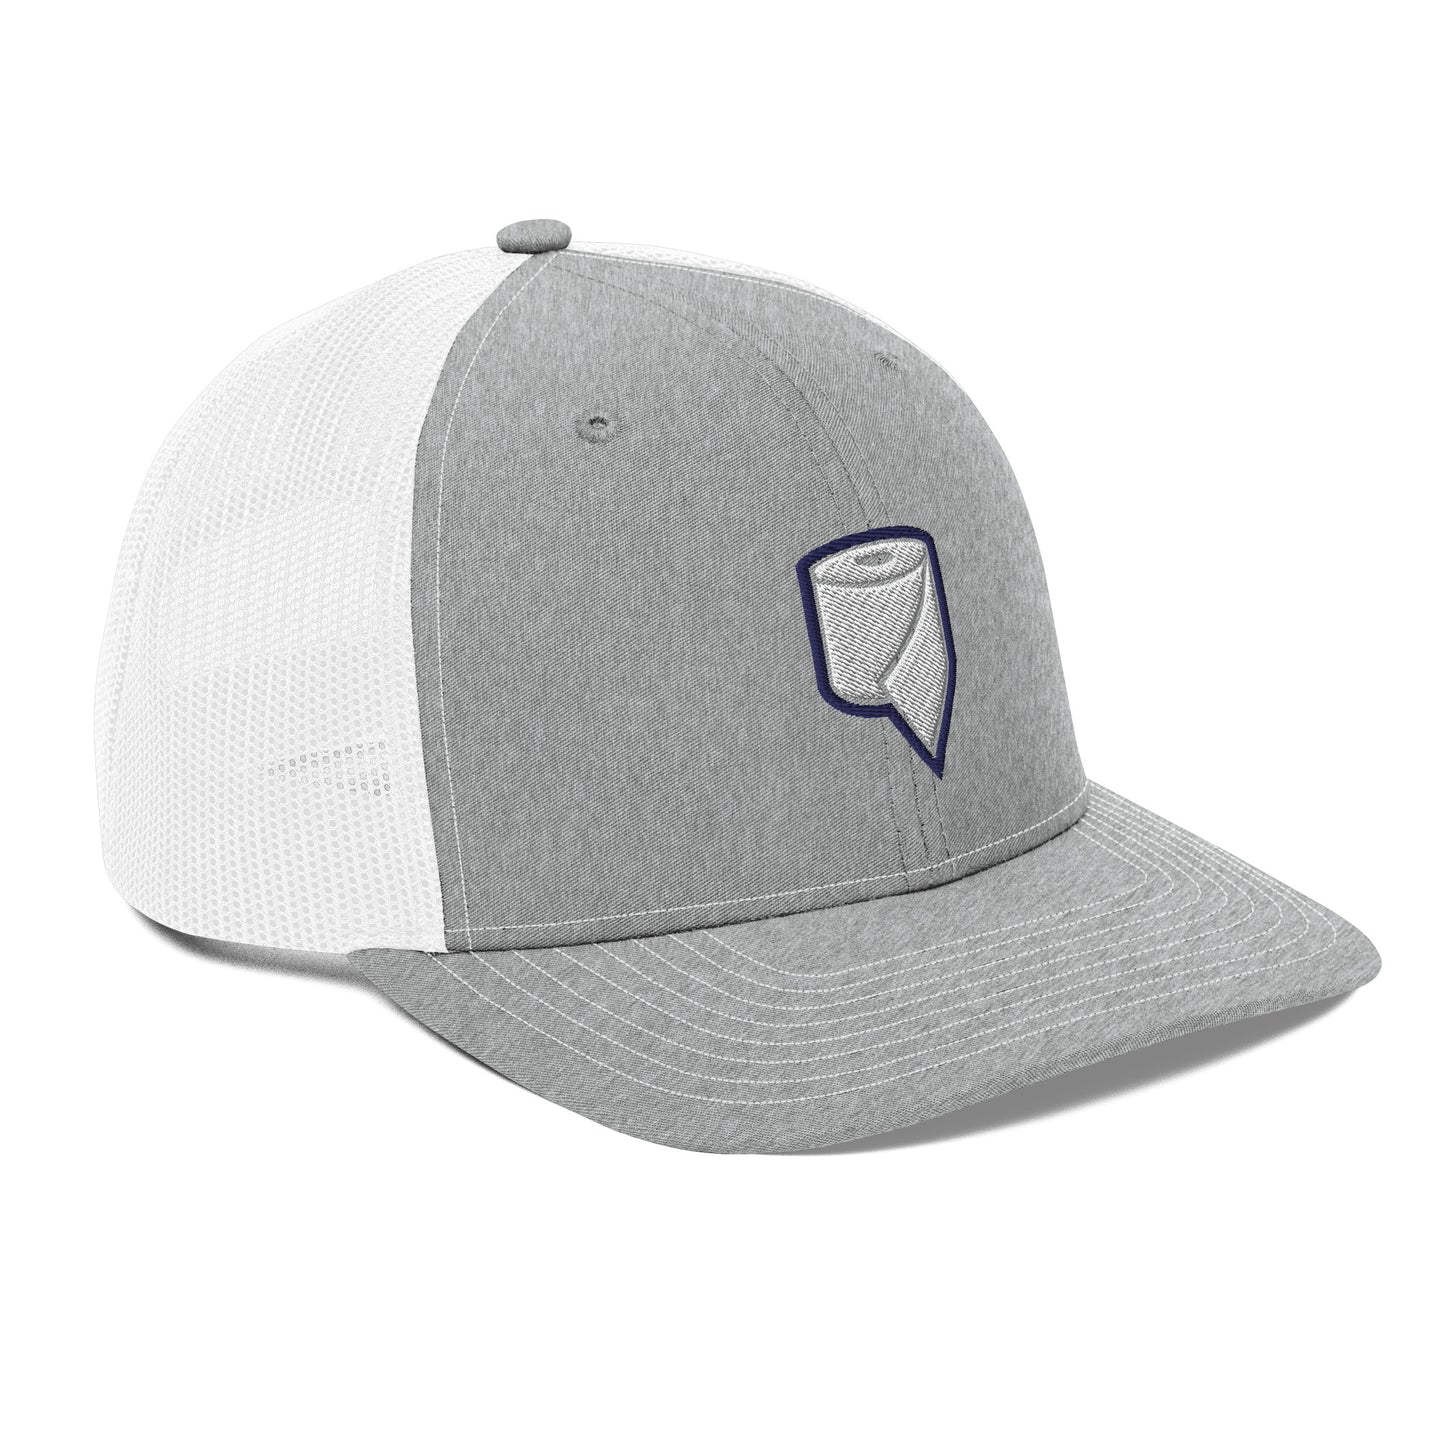 Gray Snapback Trucker Hat - The Large Roll